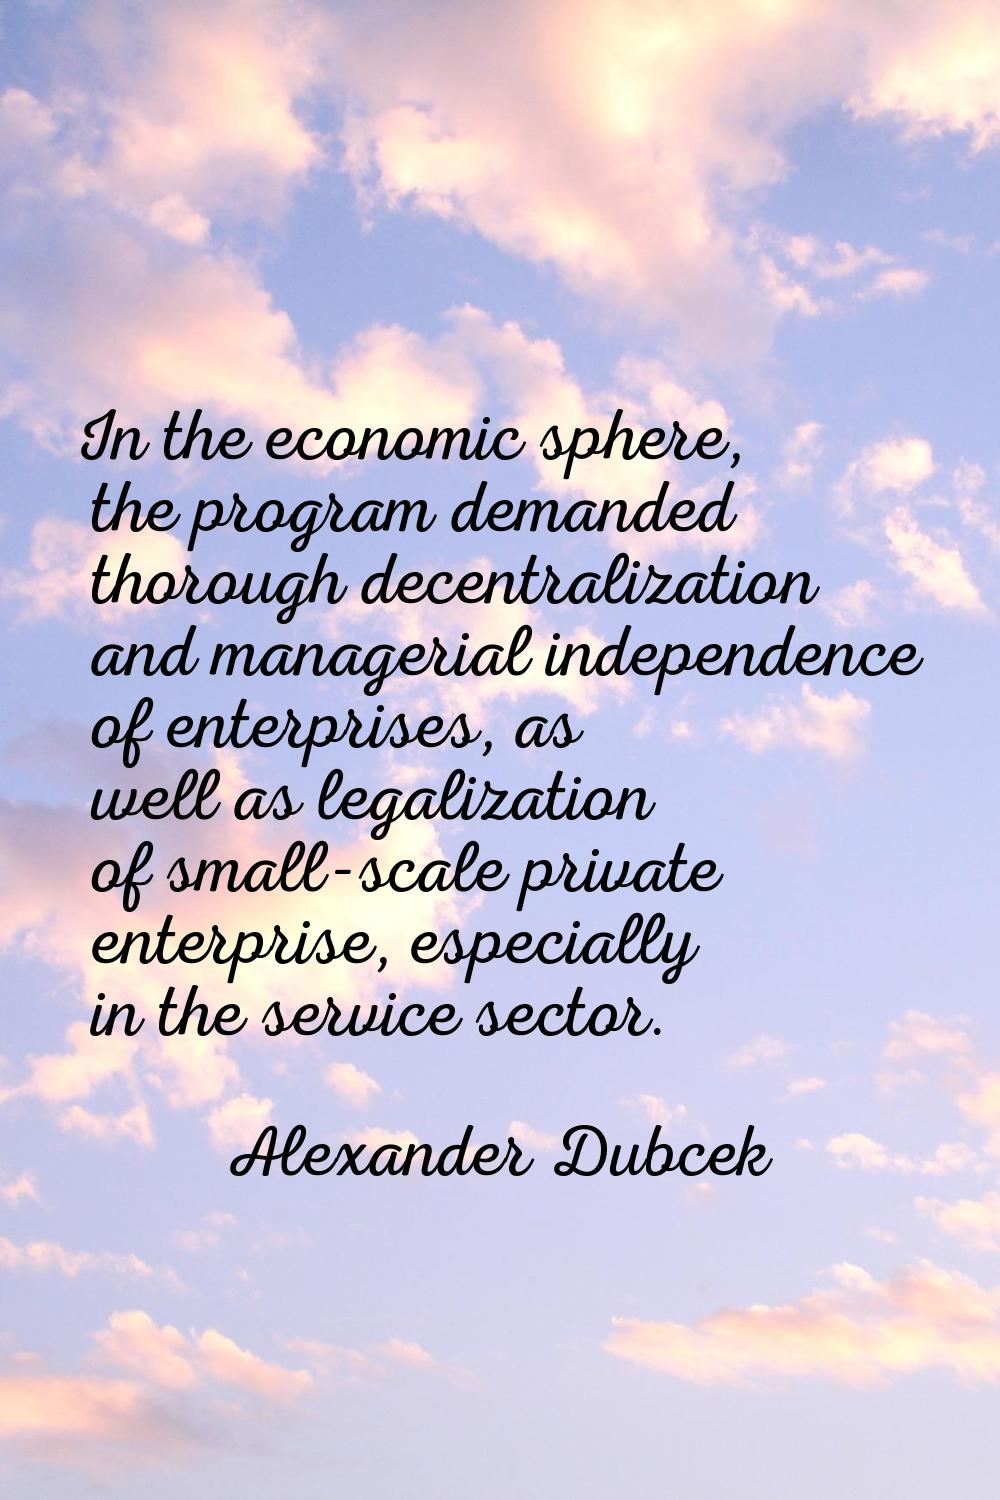 In the economic sphere, the program demanded thorough decentralization and managerial independence 